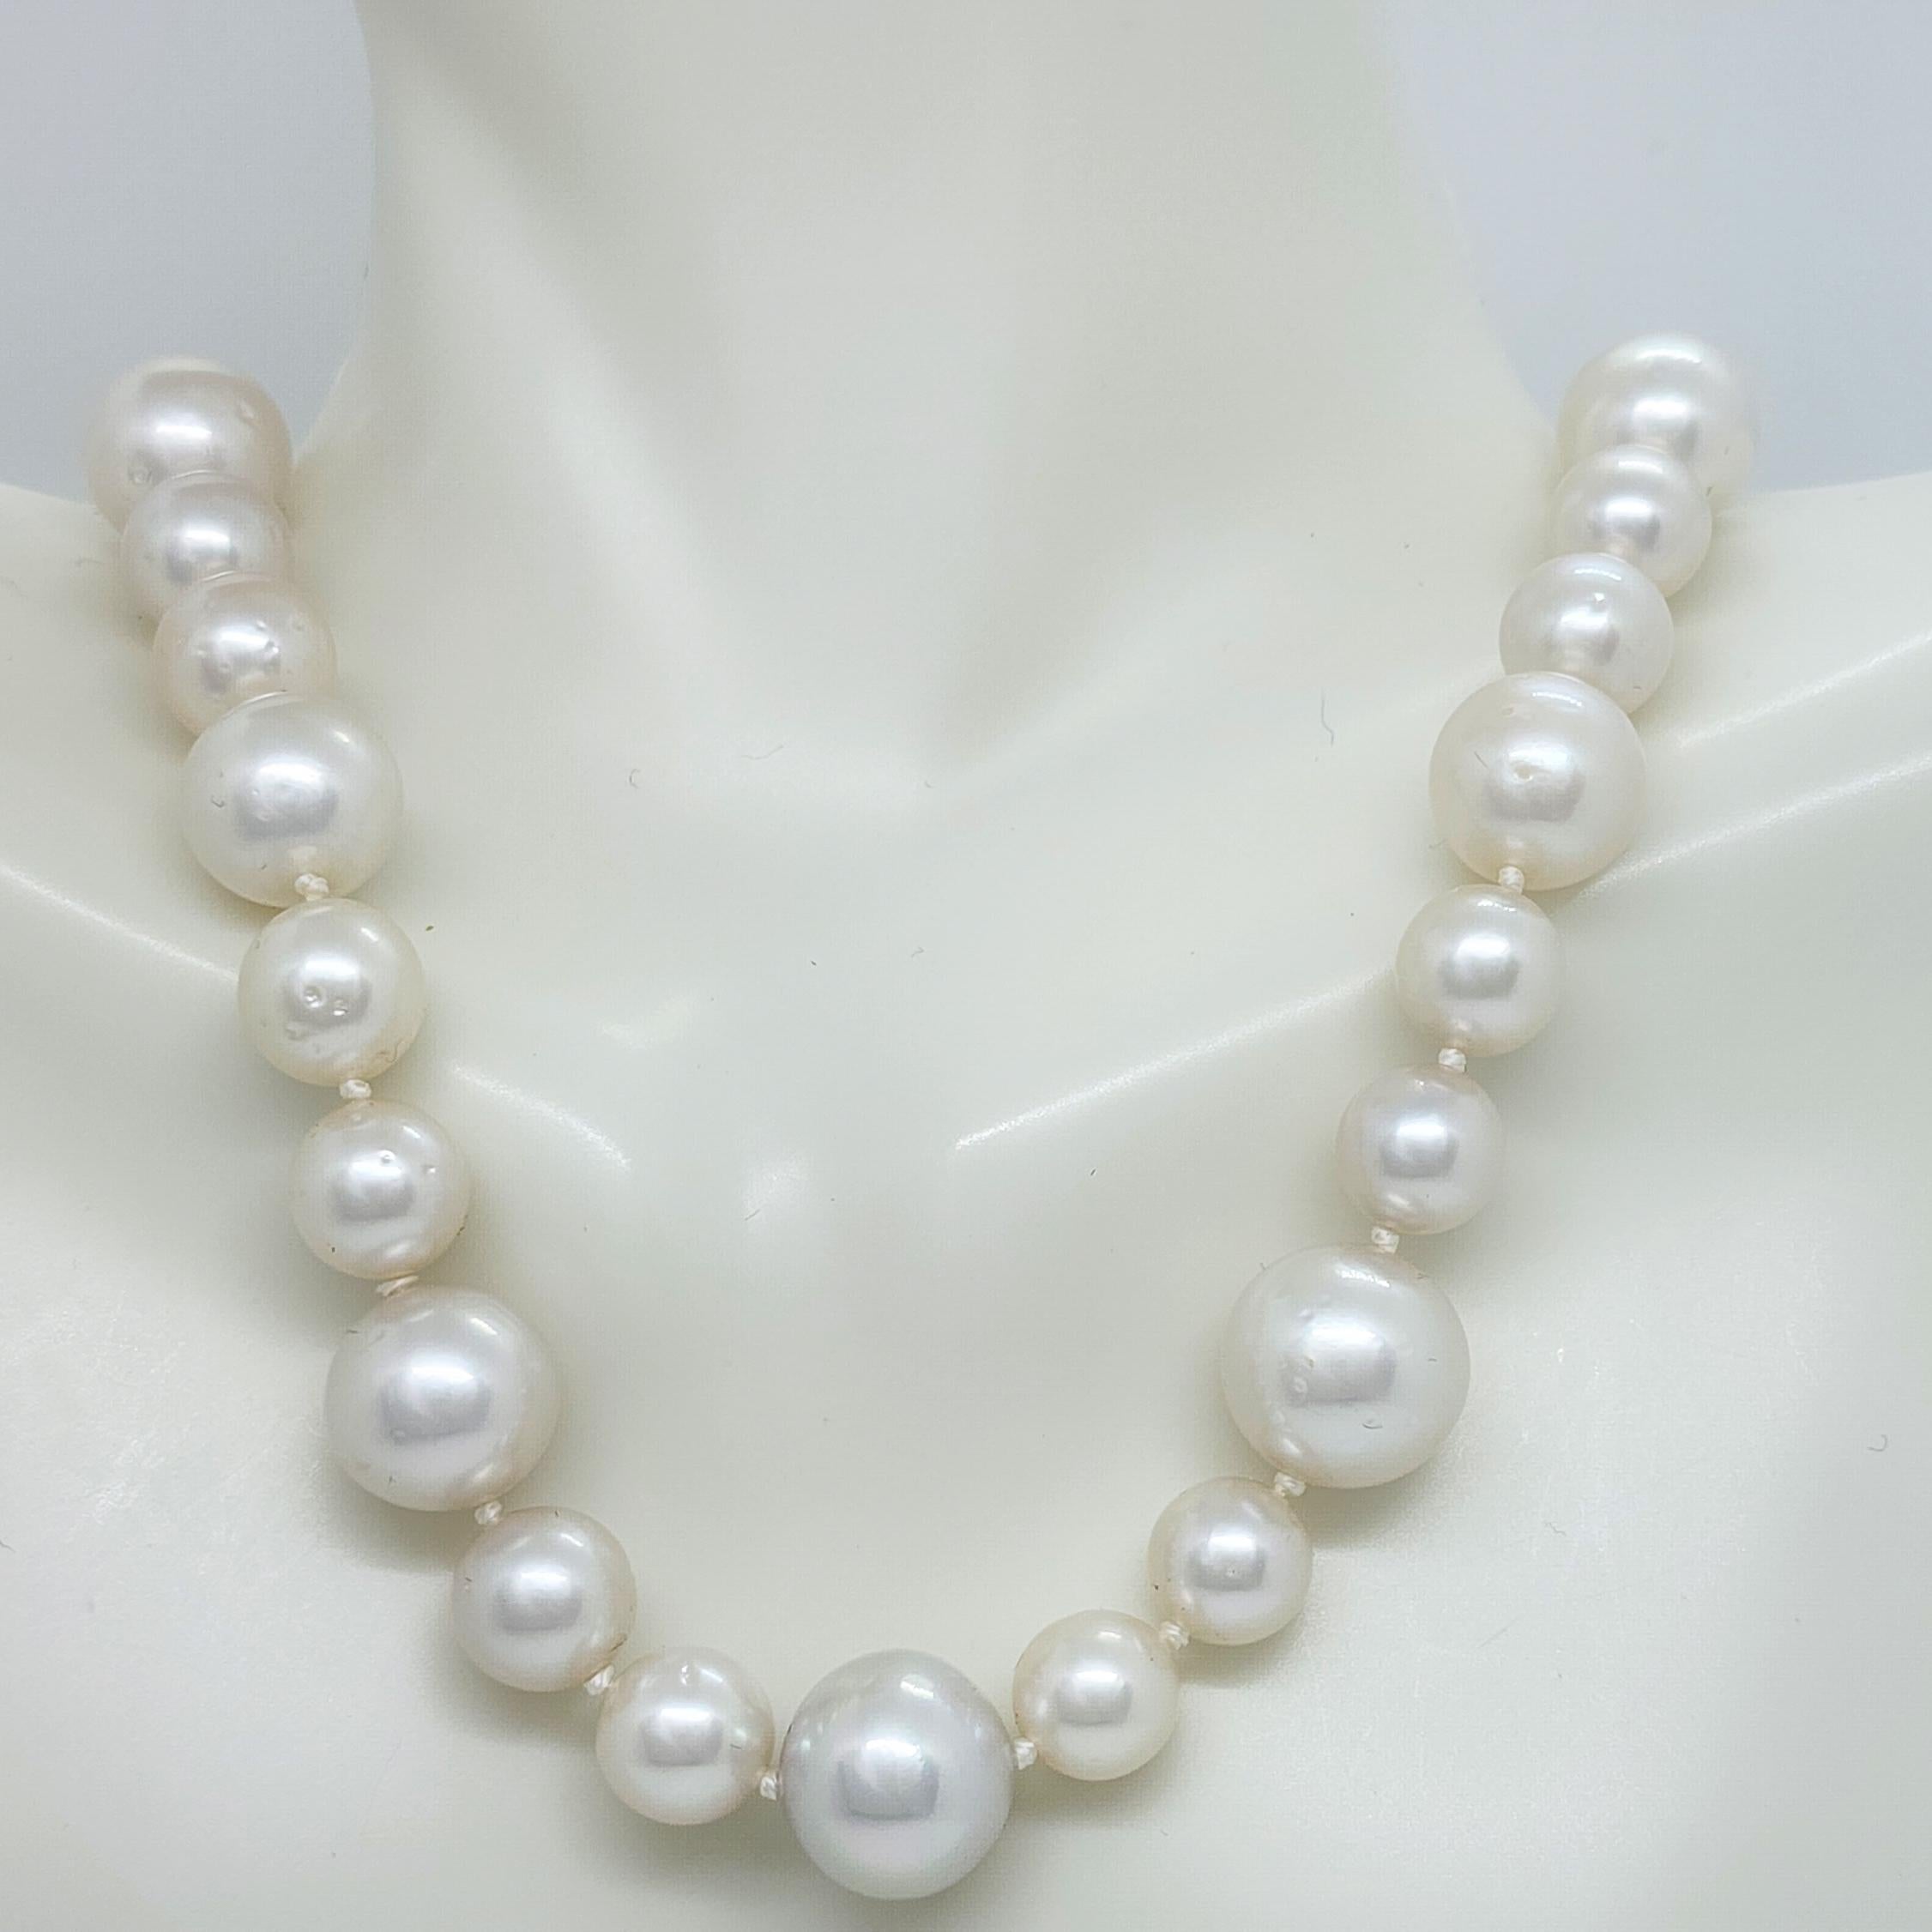 Beautiful white pearl rounds 8-12 mm with a handmade 14k yellow gold toggle clasp.  Length is 17